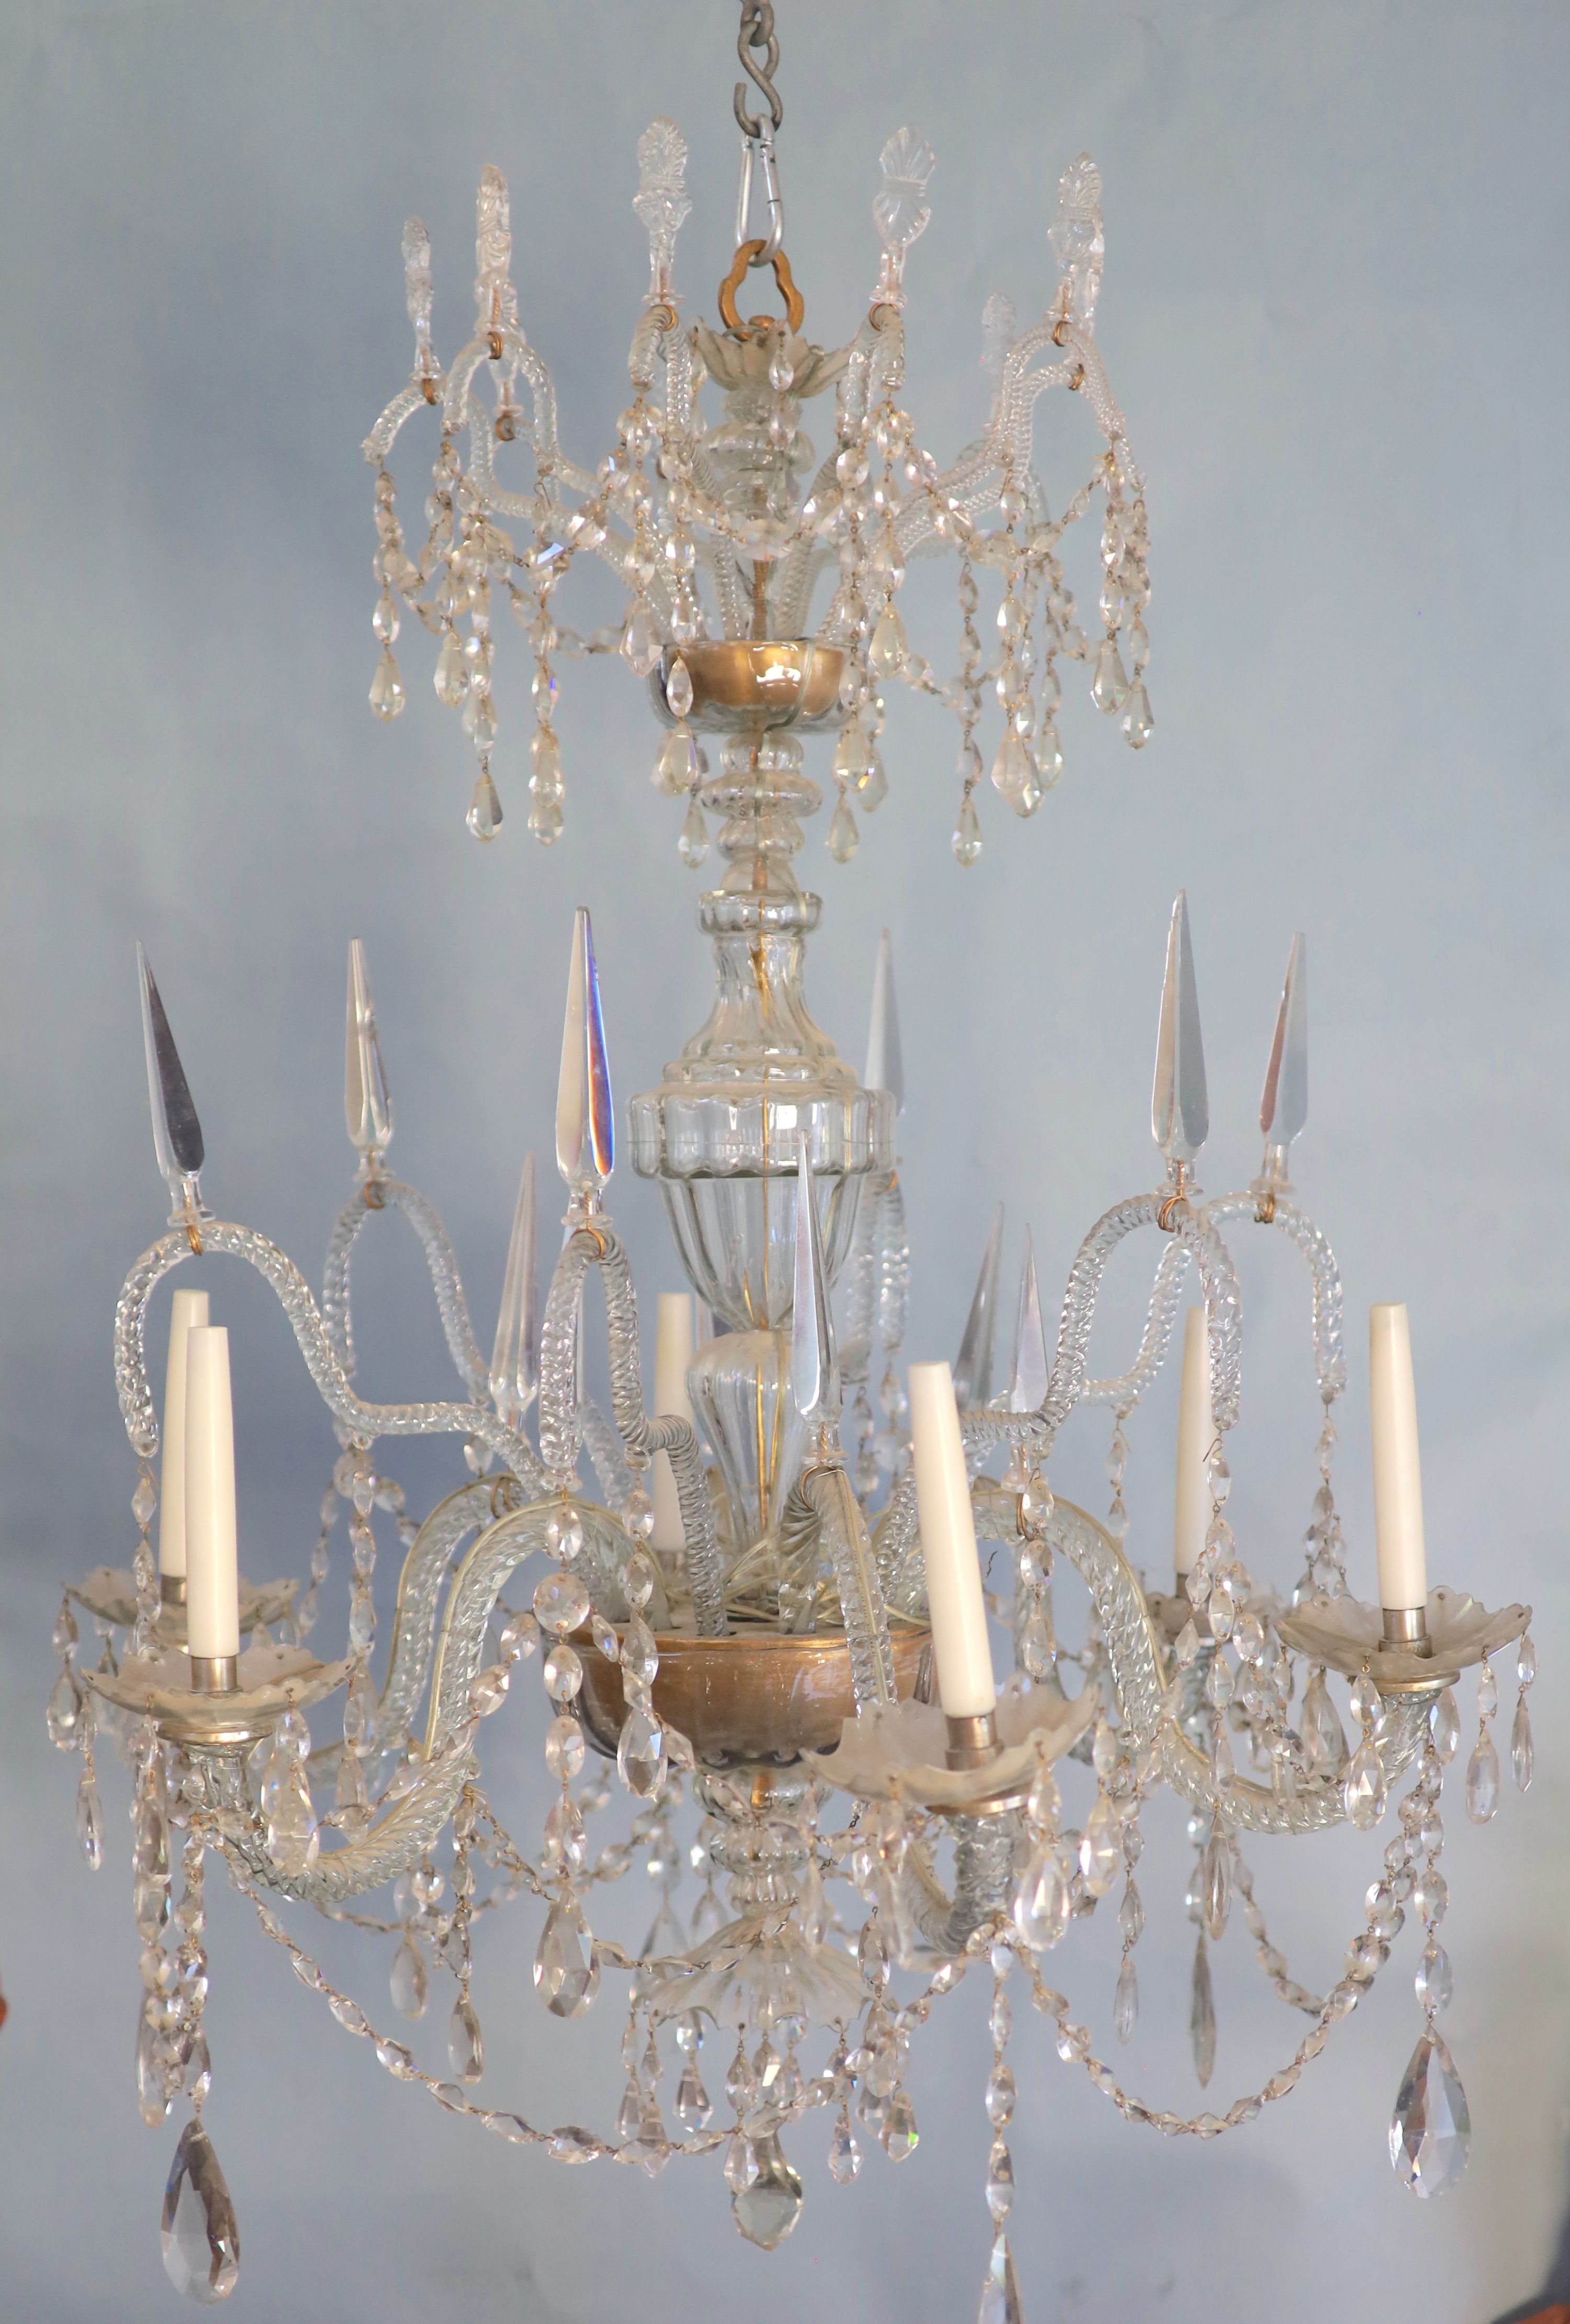 A large George III cut-glass six light chandelier, c.1780, 85cm wide, 102cm high. Provenance - Sotheby’s’ 1992 sale of the contents of Groombridge Place, near Tunbridge Wells, valued in the 1930 inventory of the house at